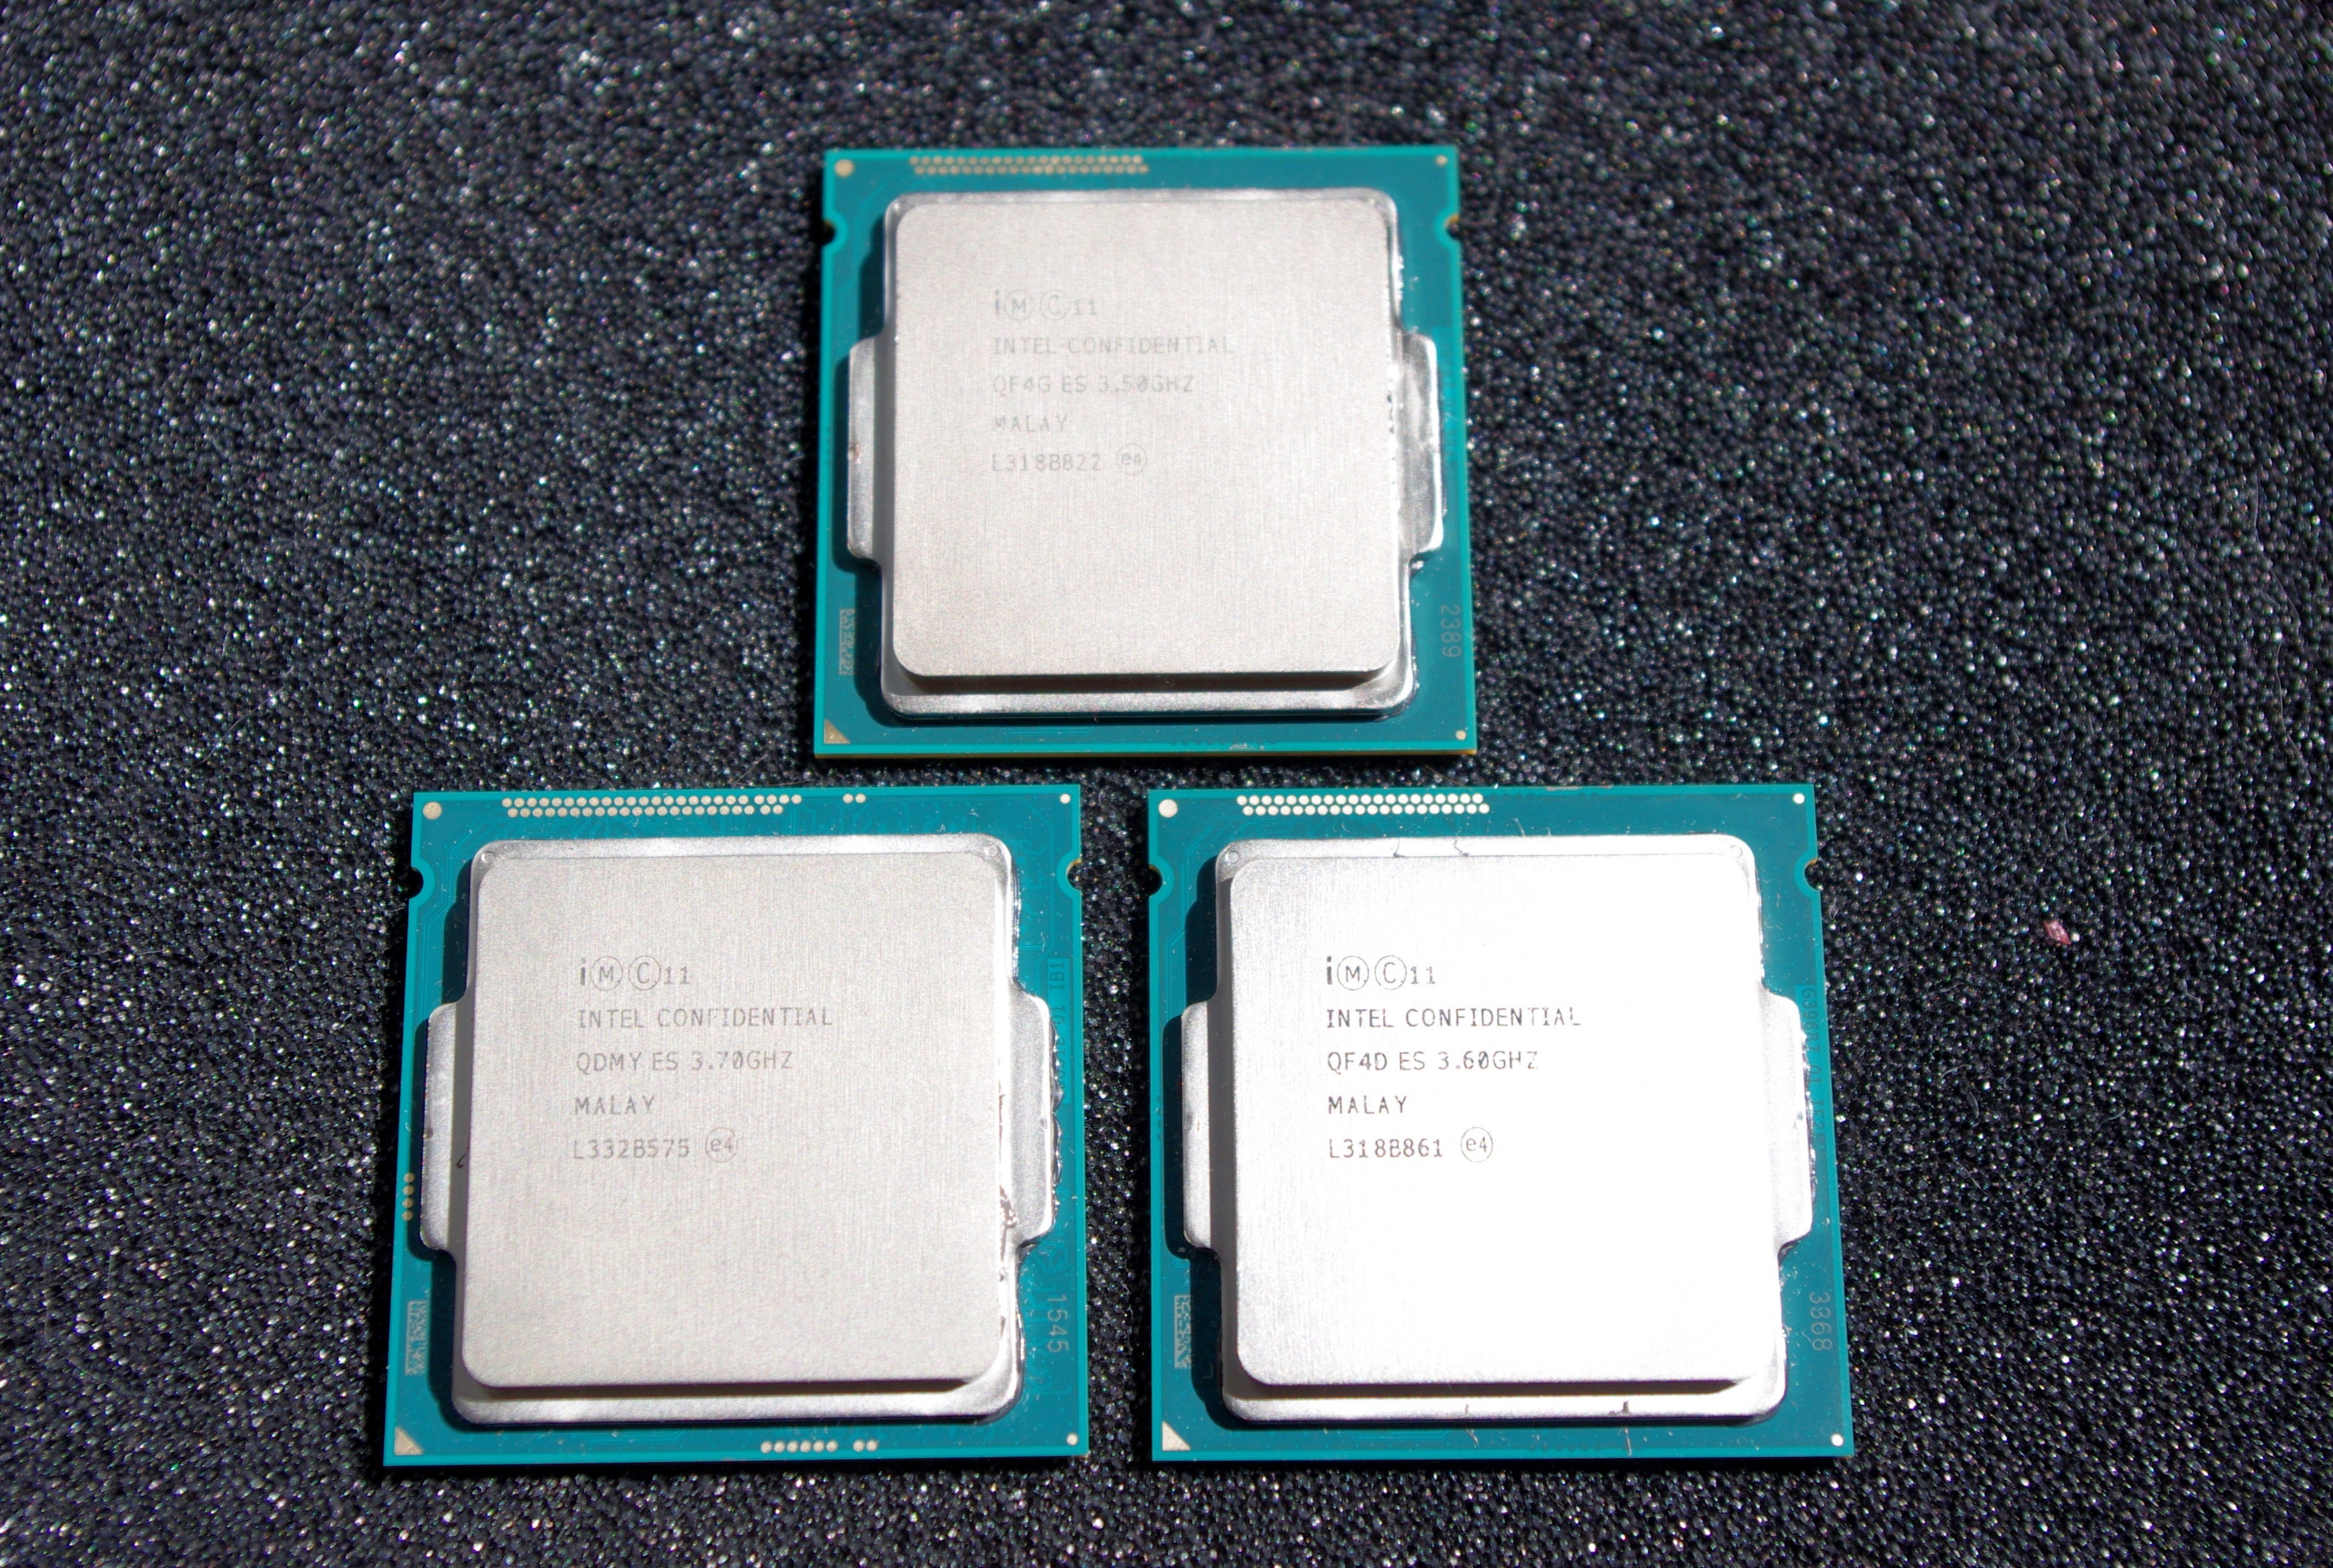 The Haswell Refresh Processors The Intel Haswell Refresh Review Core I7 4790 I5 4690 And I3 4360 Tested